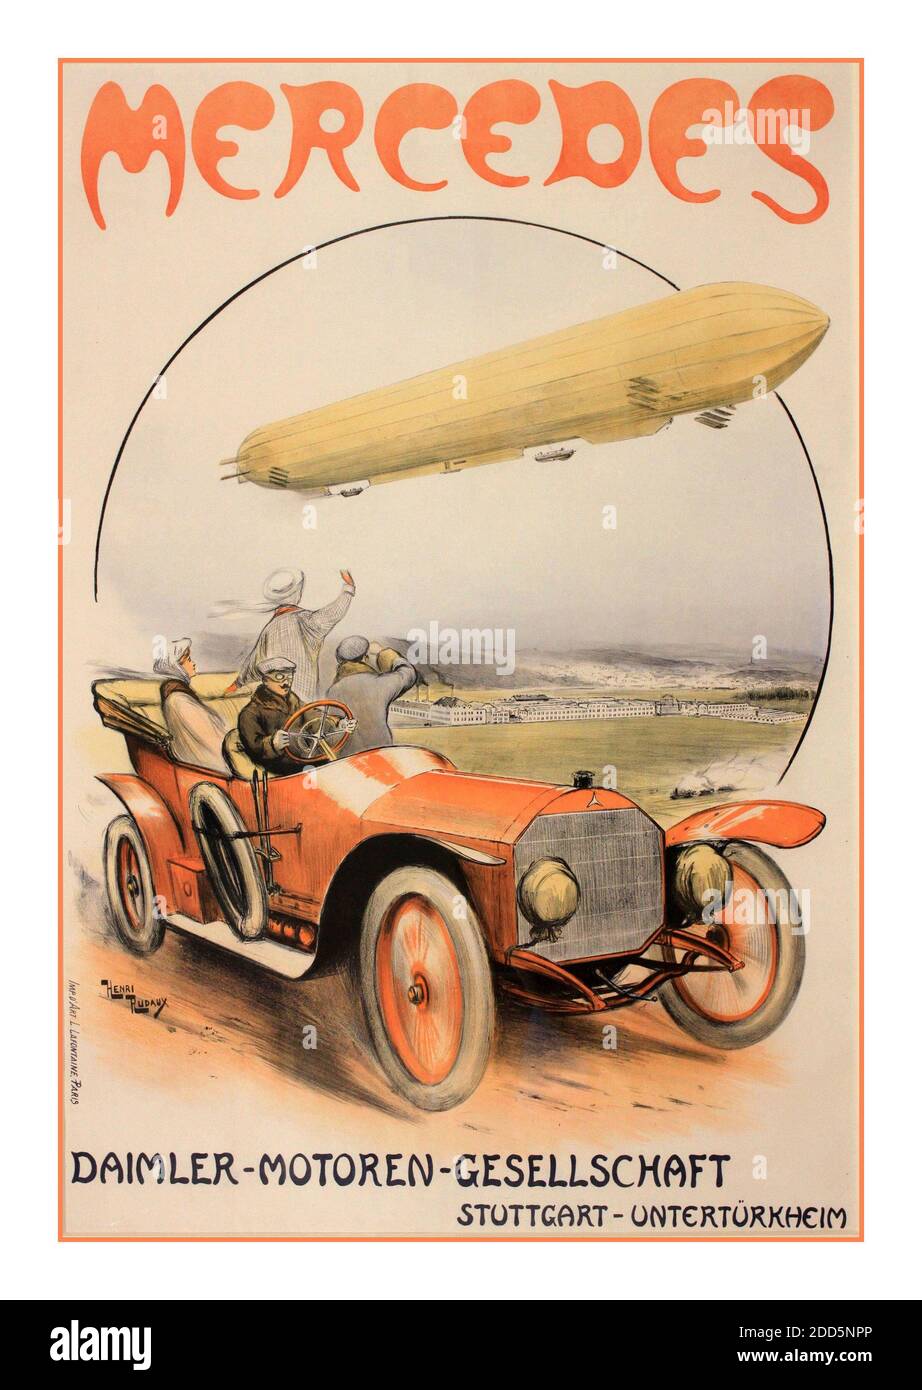 Vintage 1900's Mercedes Advertising Poster, Daimler-Motoren, original poster printed by Imp. D’Art L, Lafontaine, Paris 1910 by Henri Rudeaux (1870-1927) 1910 Open Tourer Mercedes 'Daimler Motoring Society' with airship Zeppelin in background Stock Photo